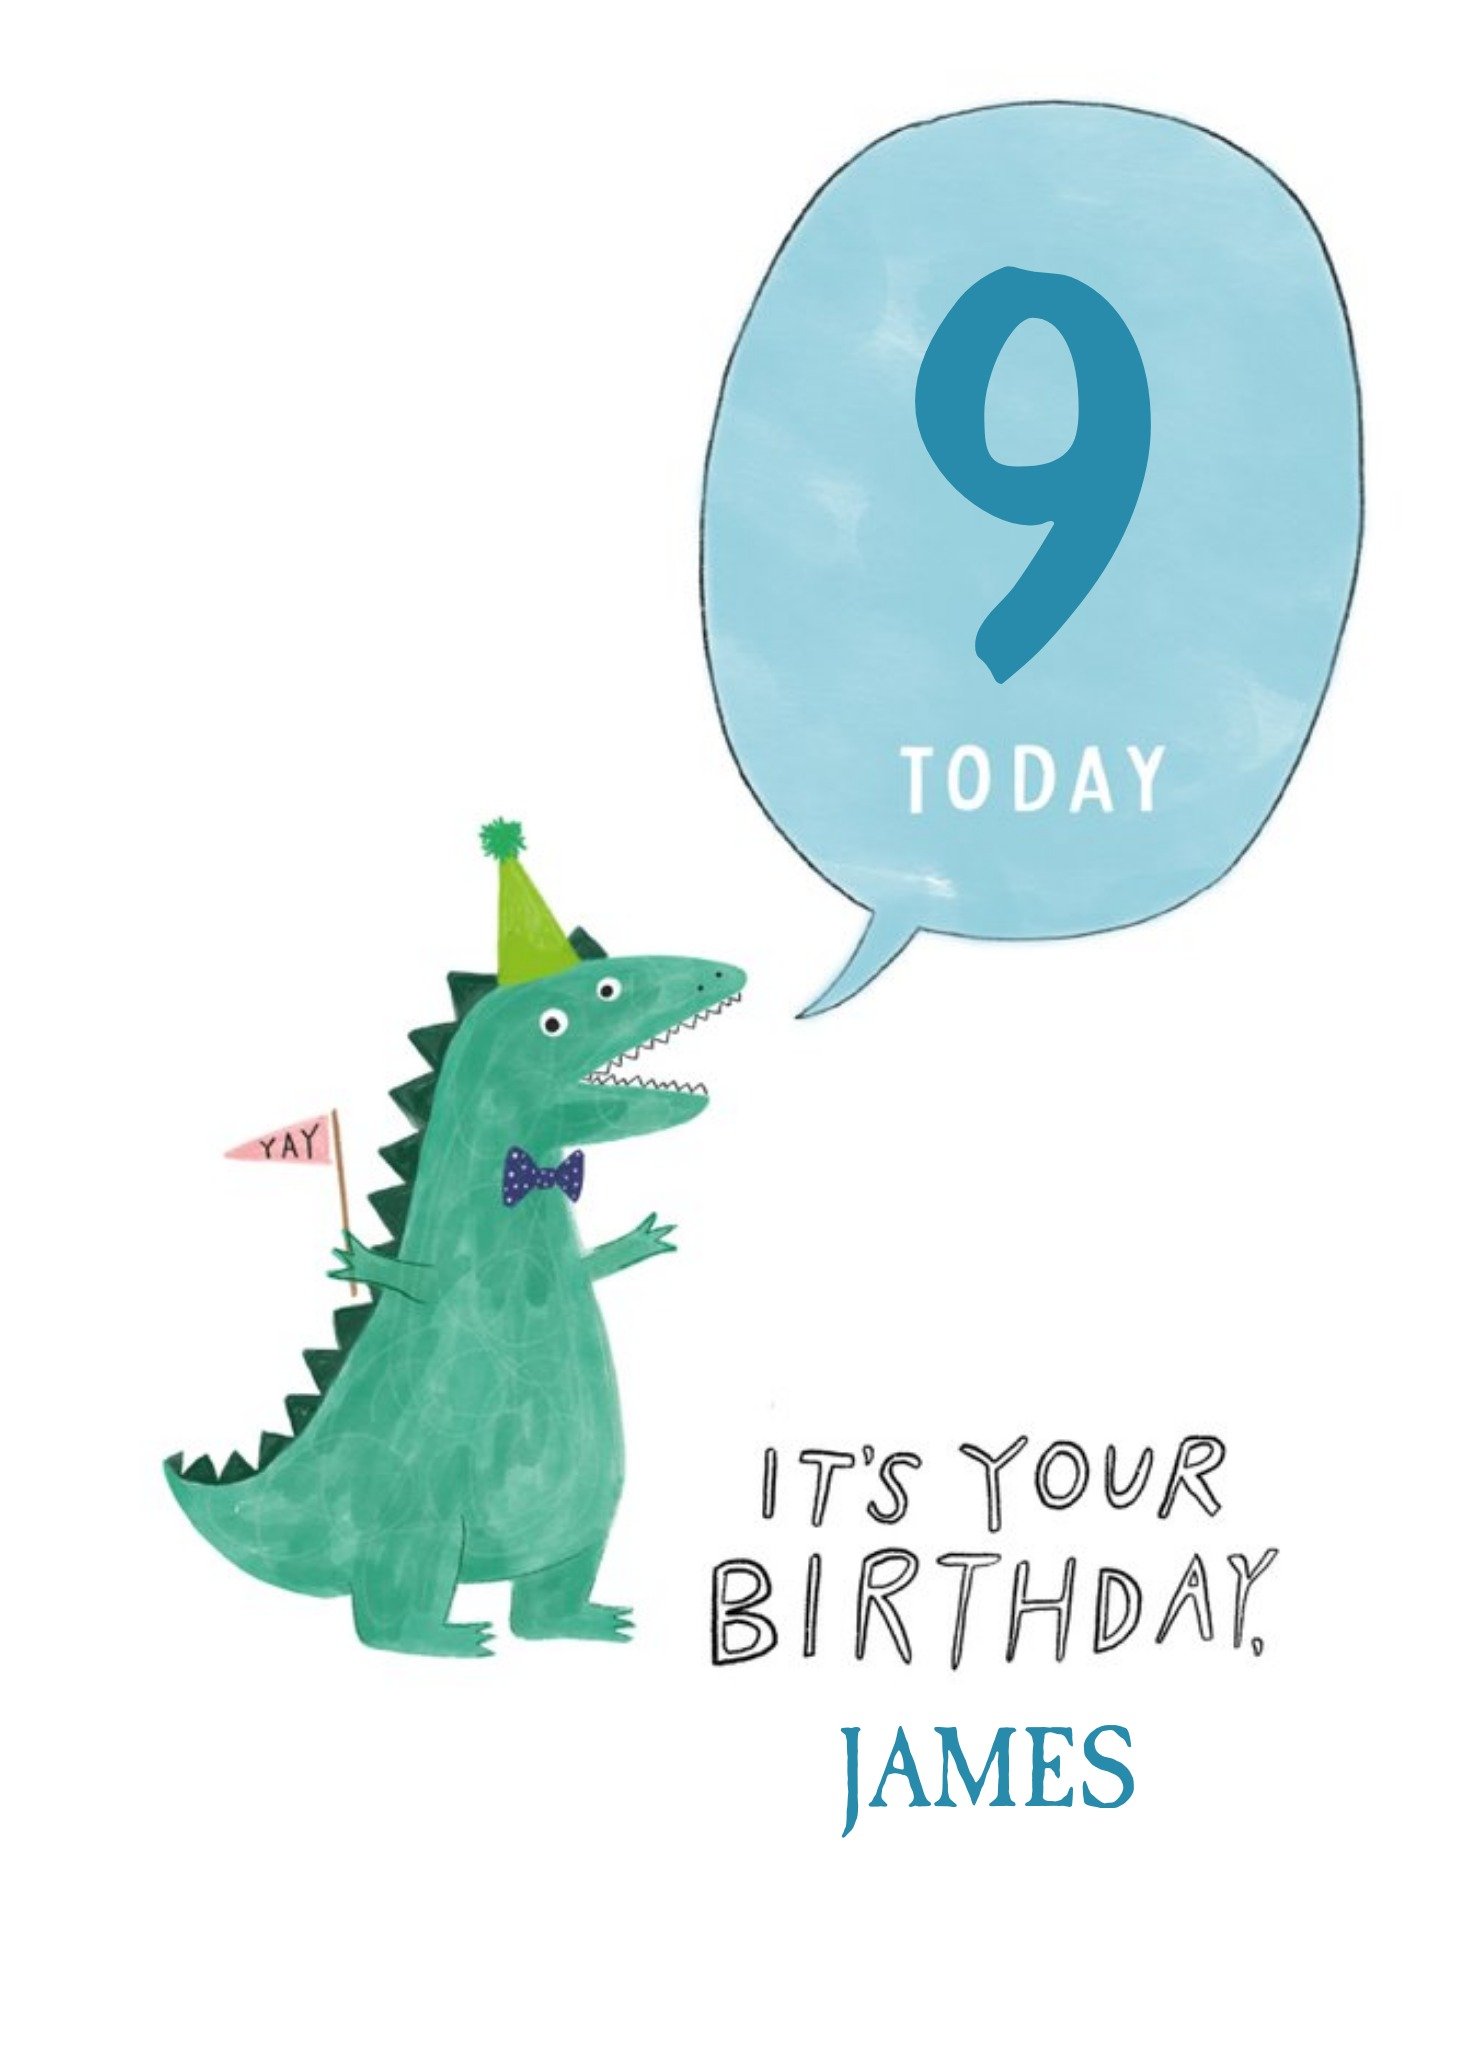 Moonpig Illustration Of A Dinosaur In A Party Hat Nineth Birthday Card, Large